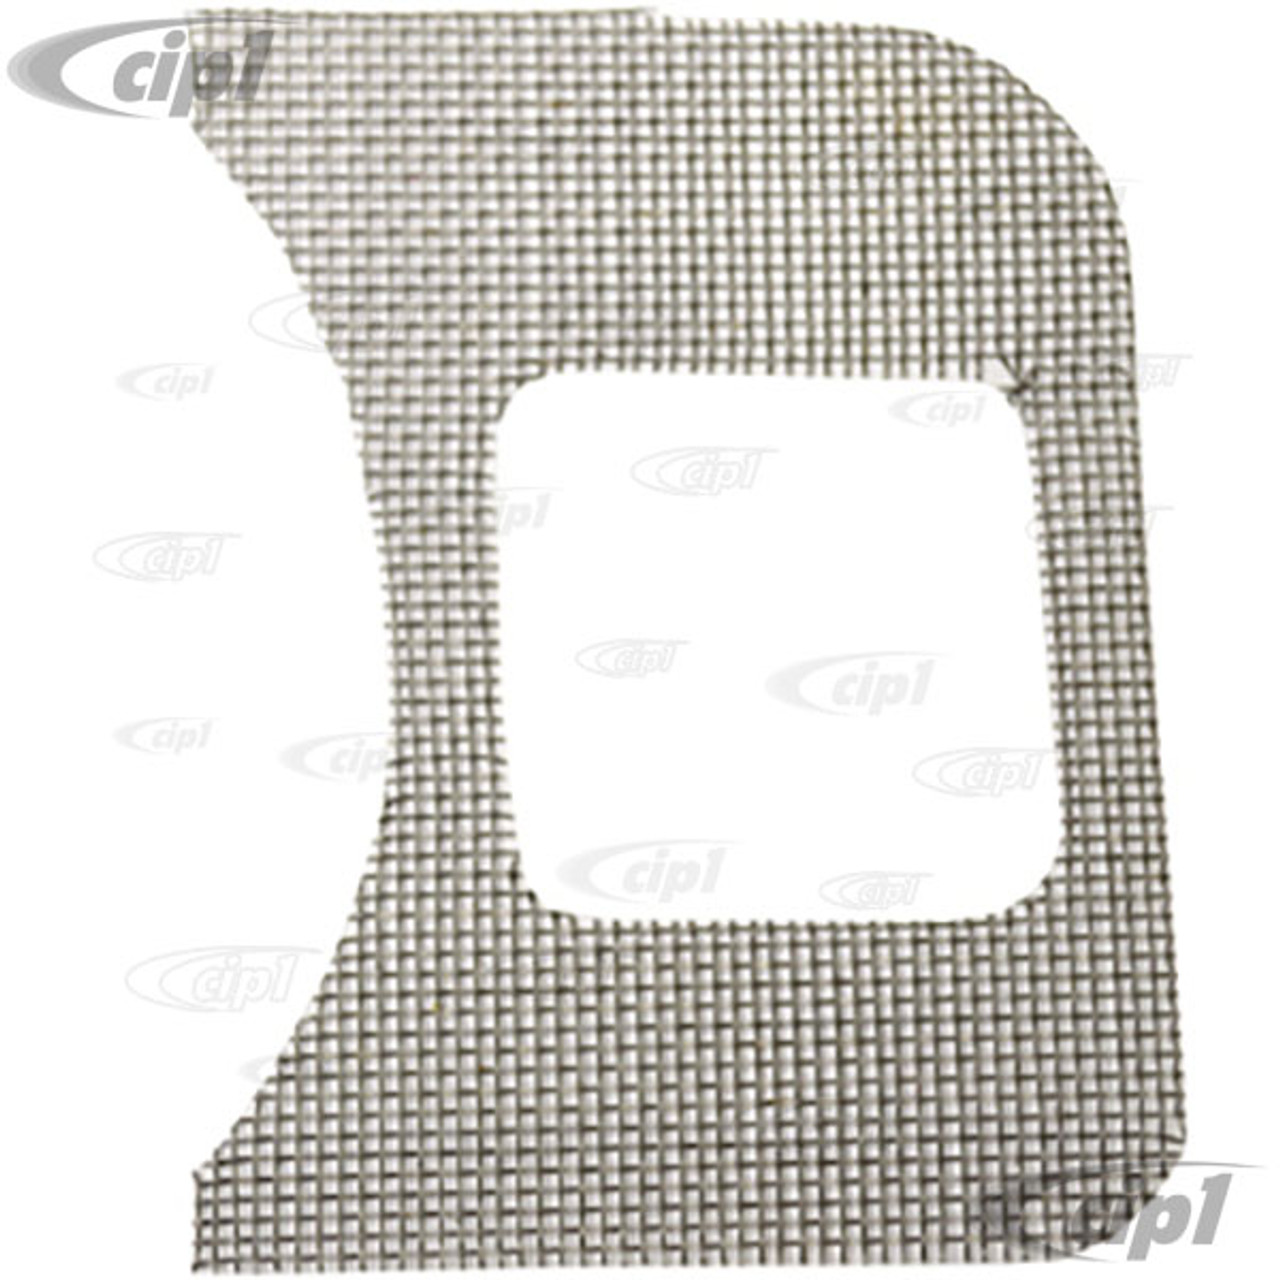 VWC-111-857-229-A - DASH GRILL MESH INSERT - FITS BEHIND